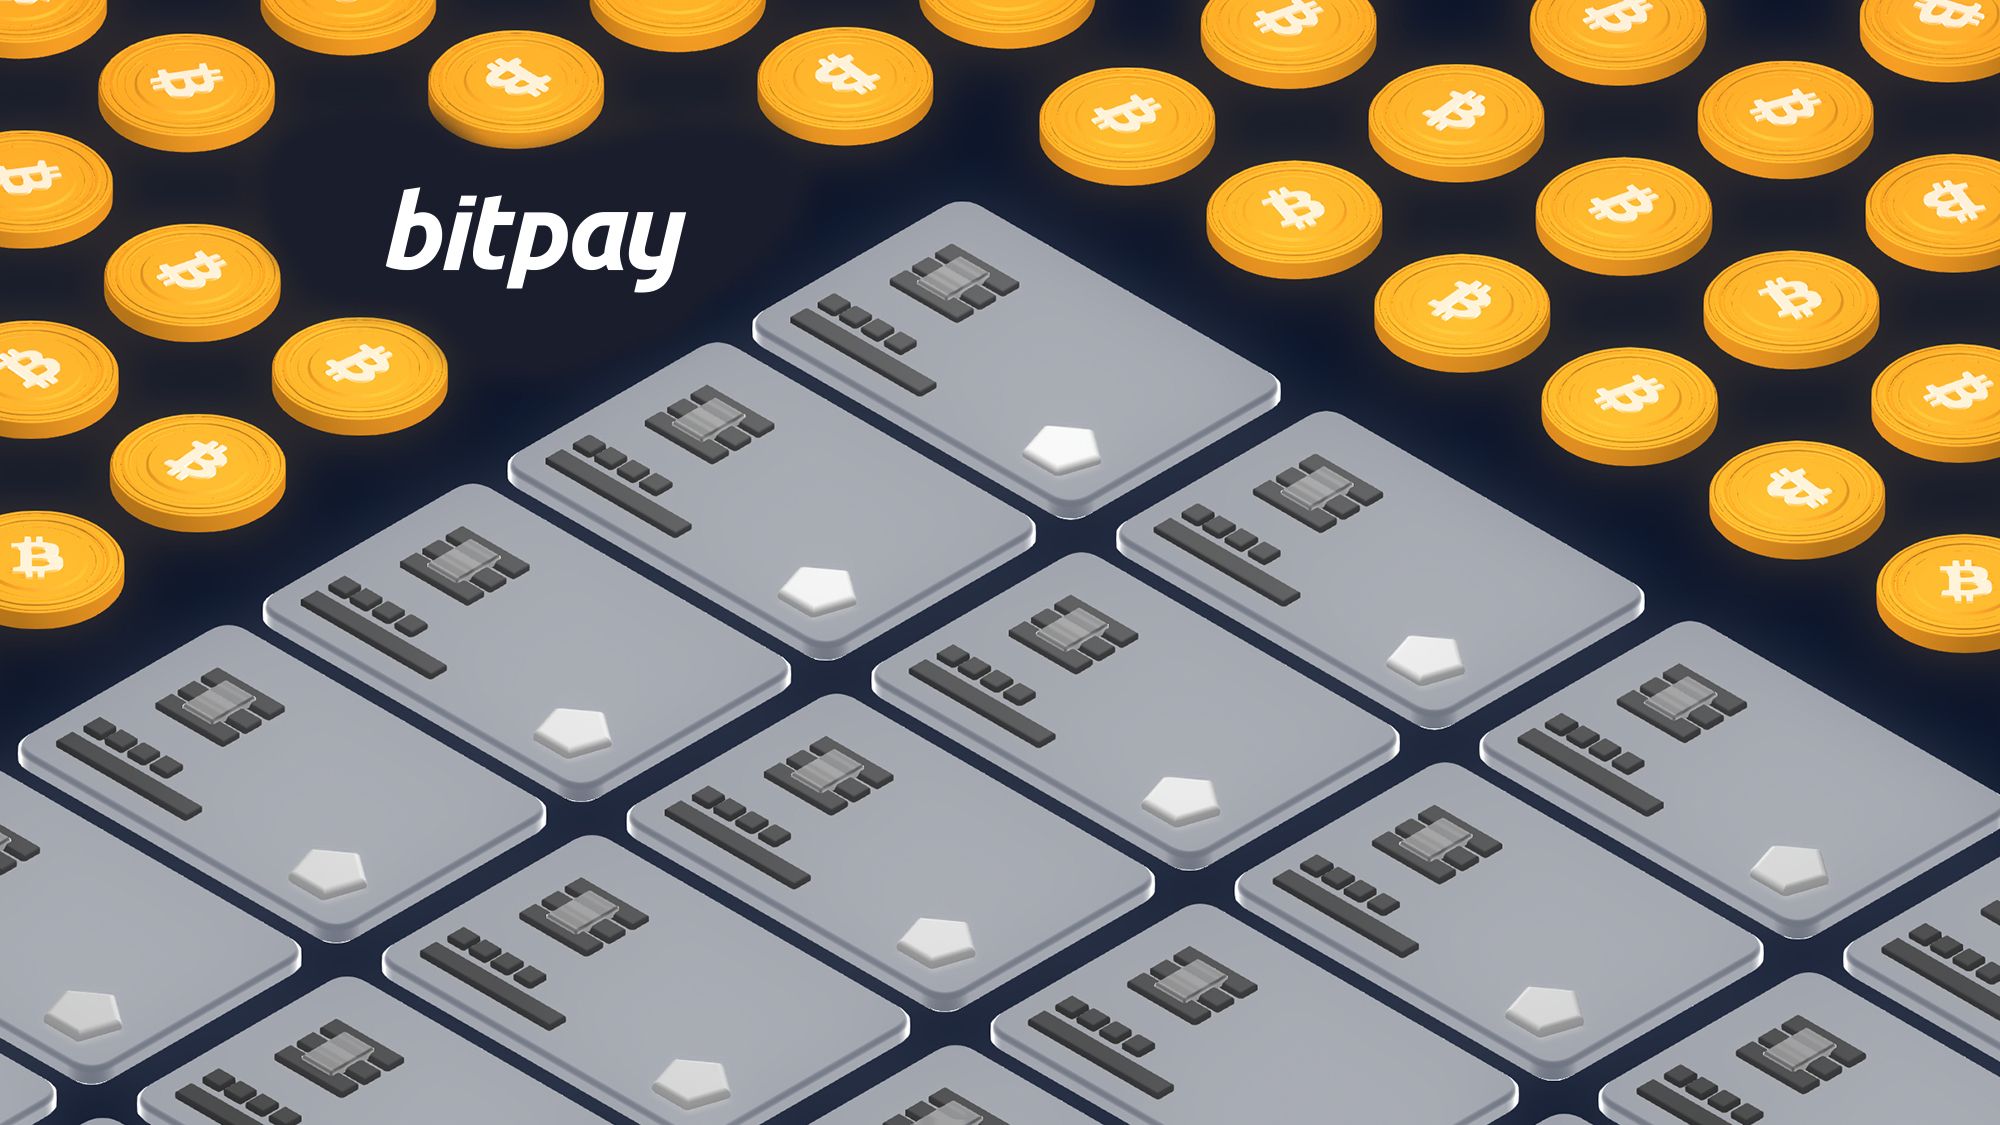 Buy Bitcoin with Prepaid Cards. Fast, Easy & Secure. Here's How to Do It.